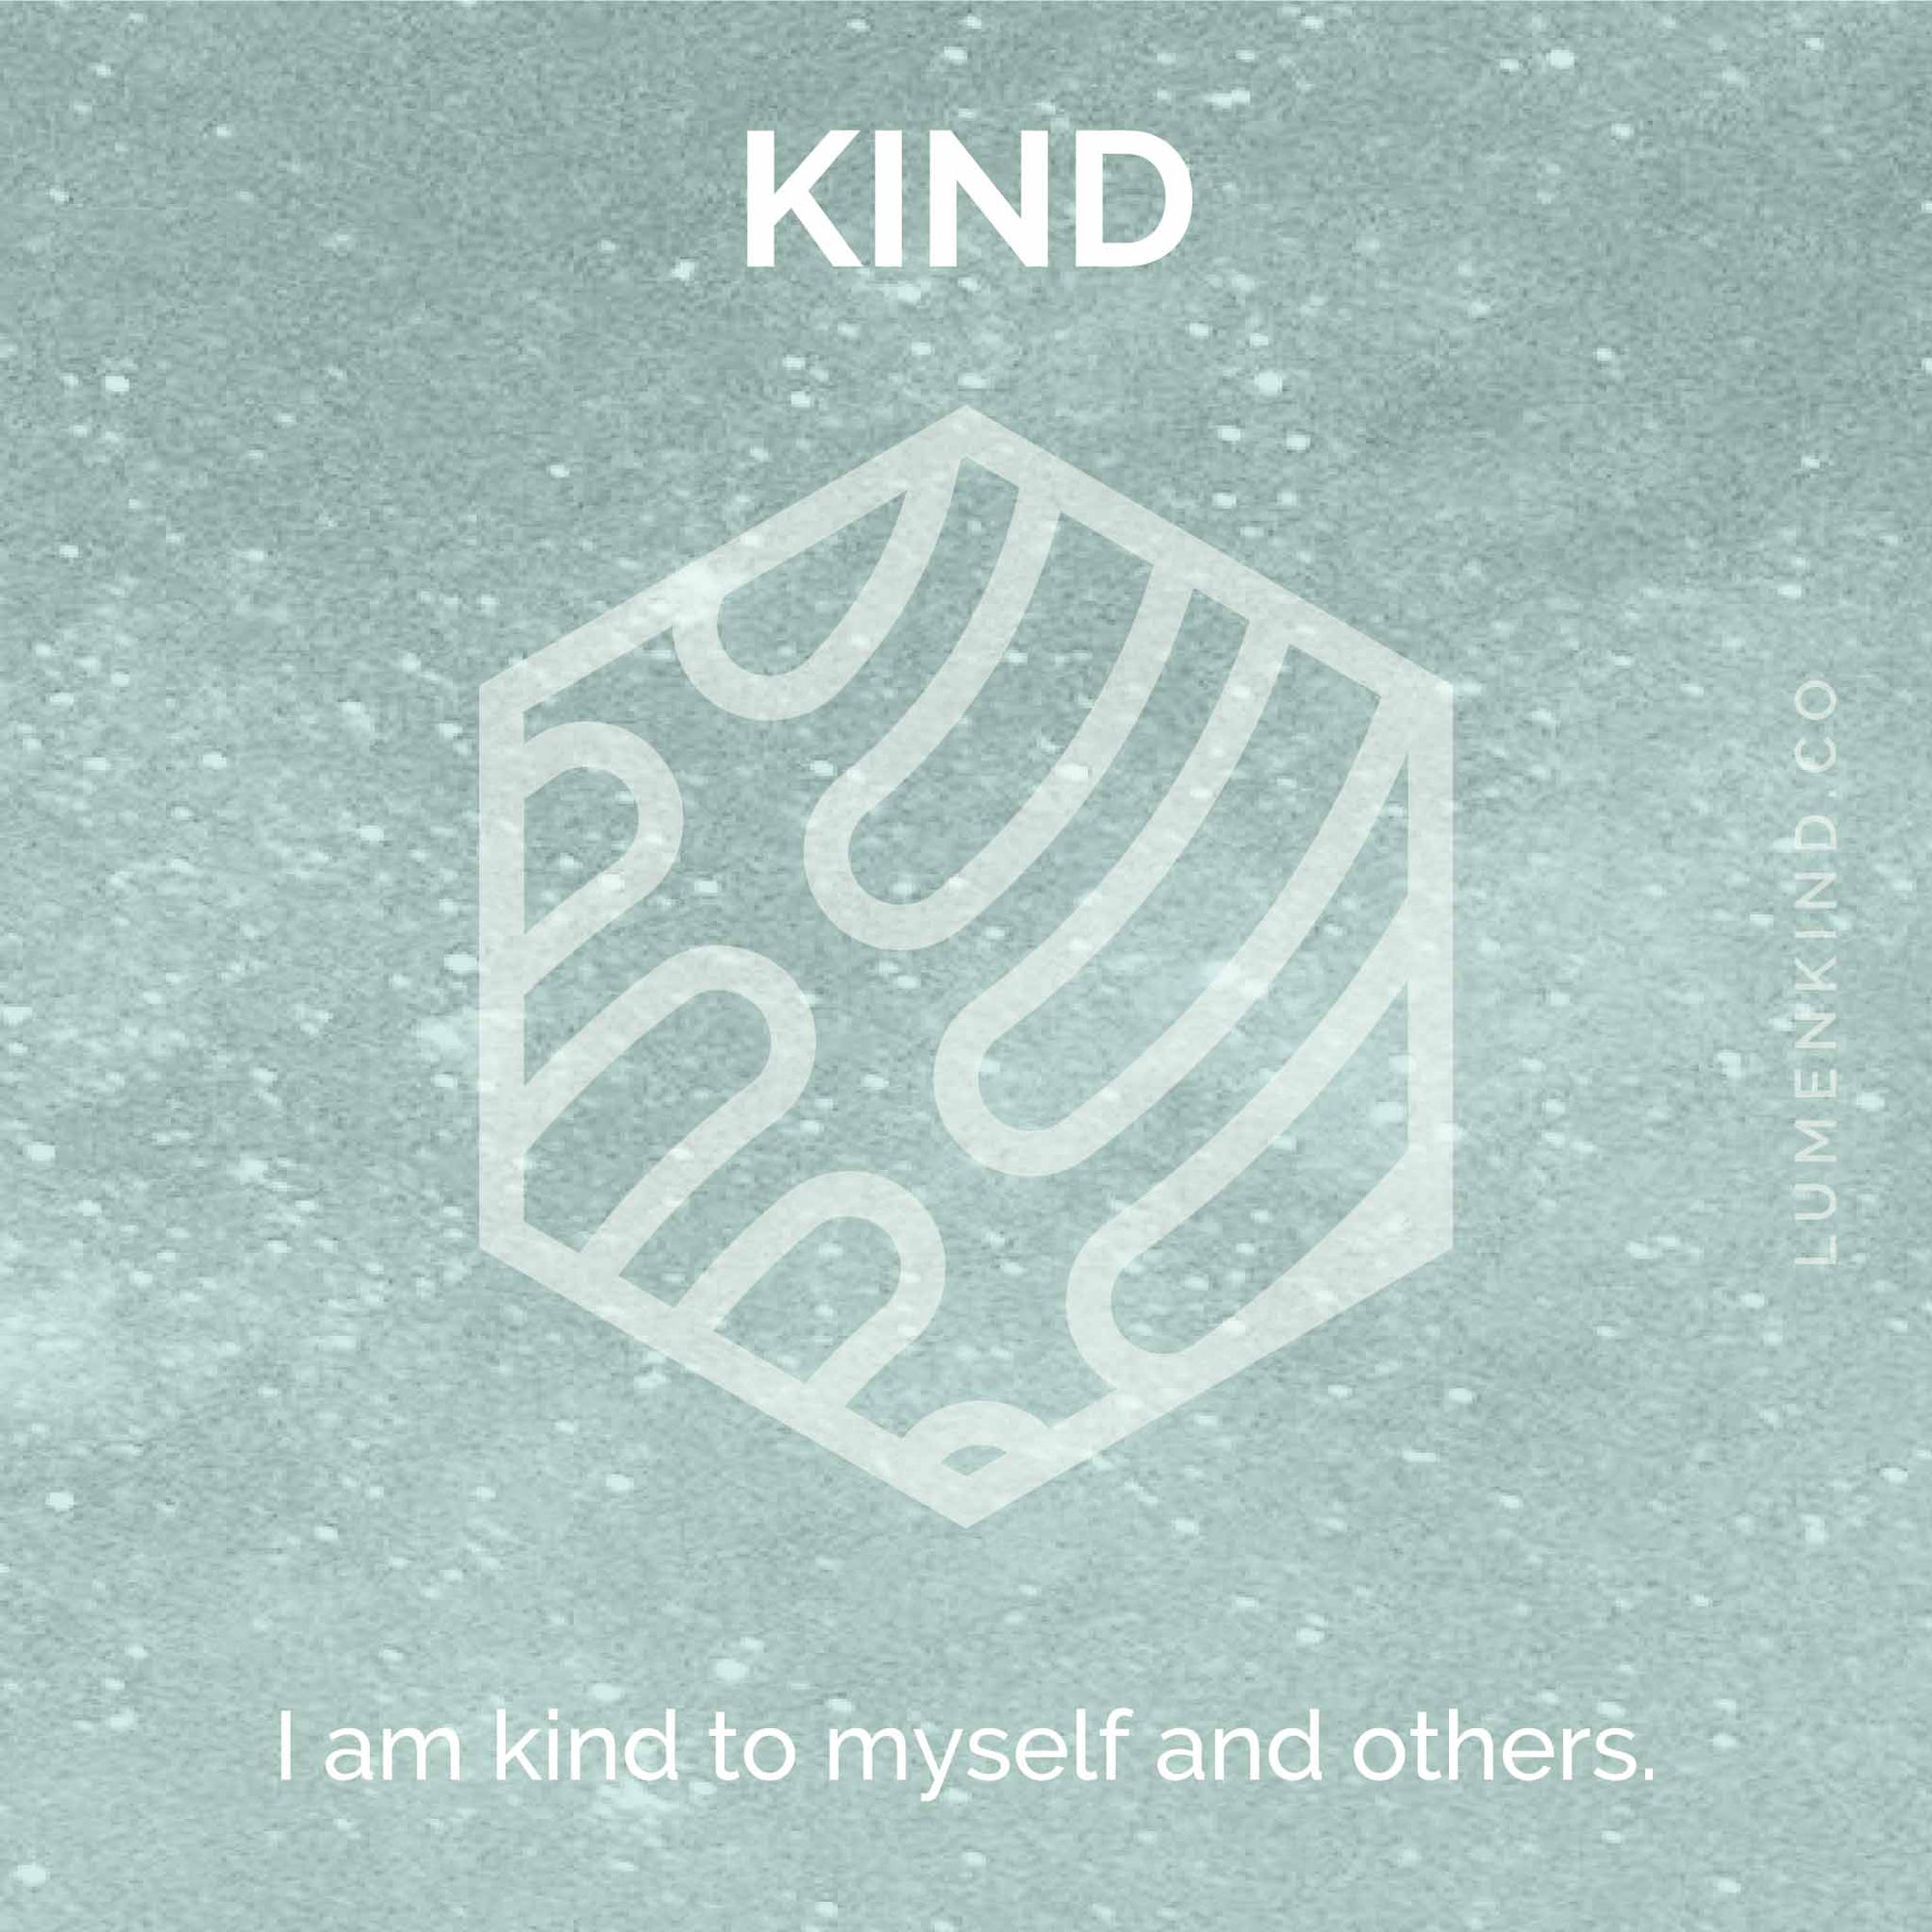 The suggested intention is KIND. I am kind to myself and others.